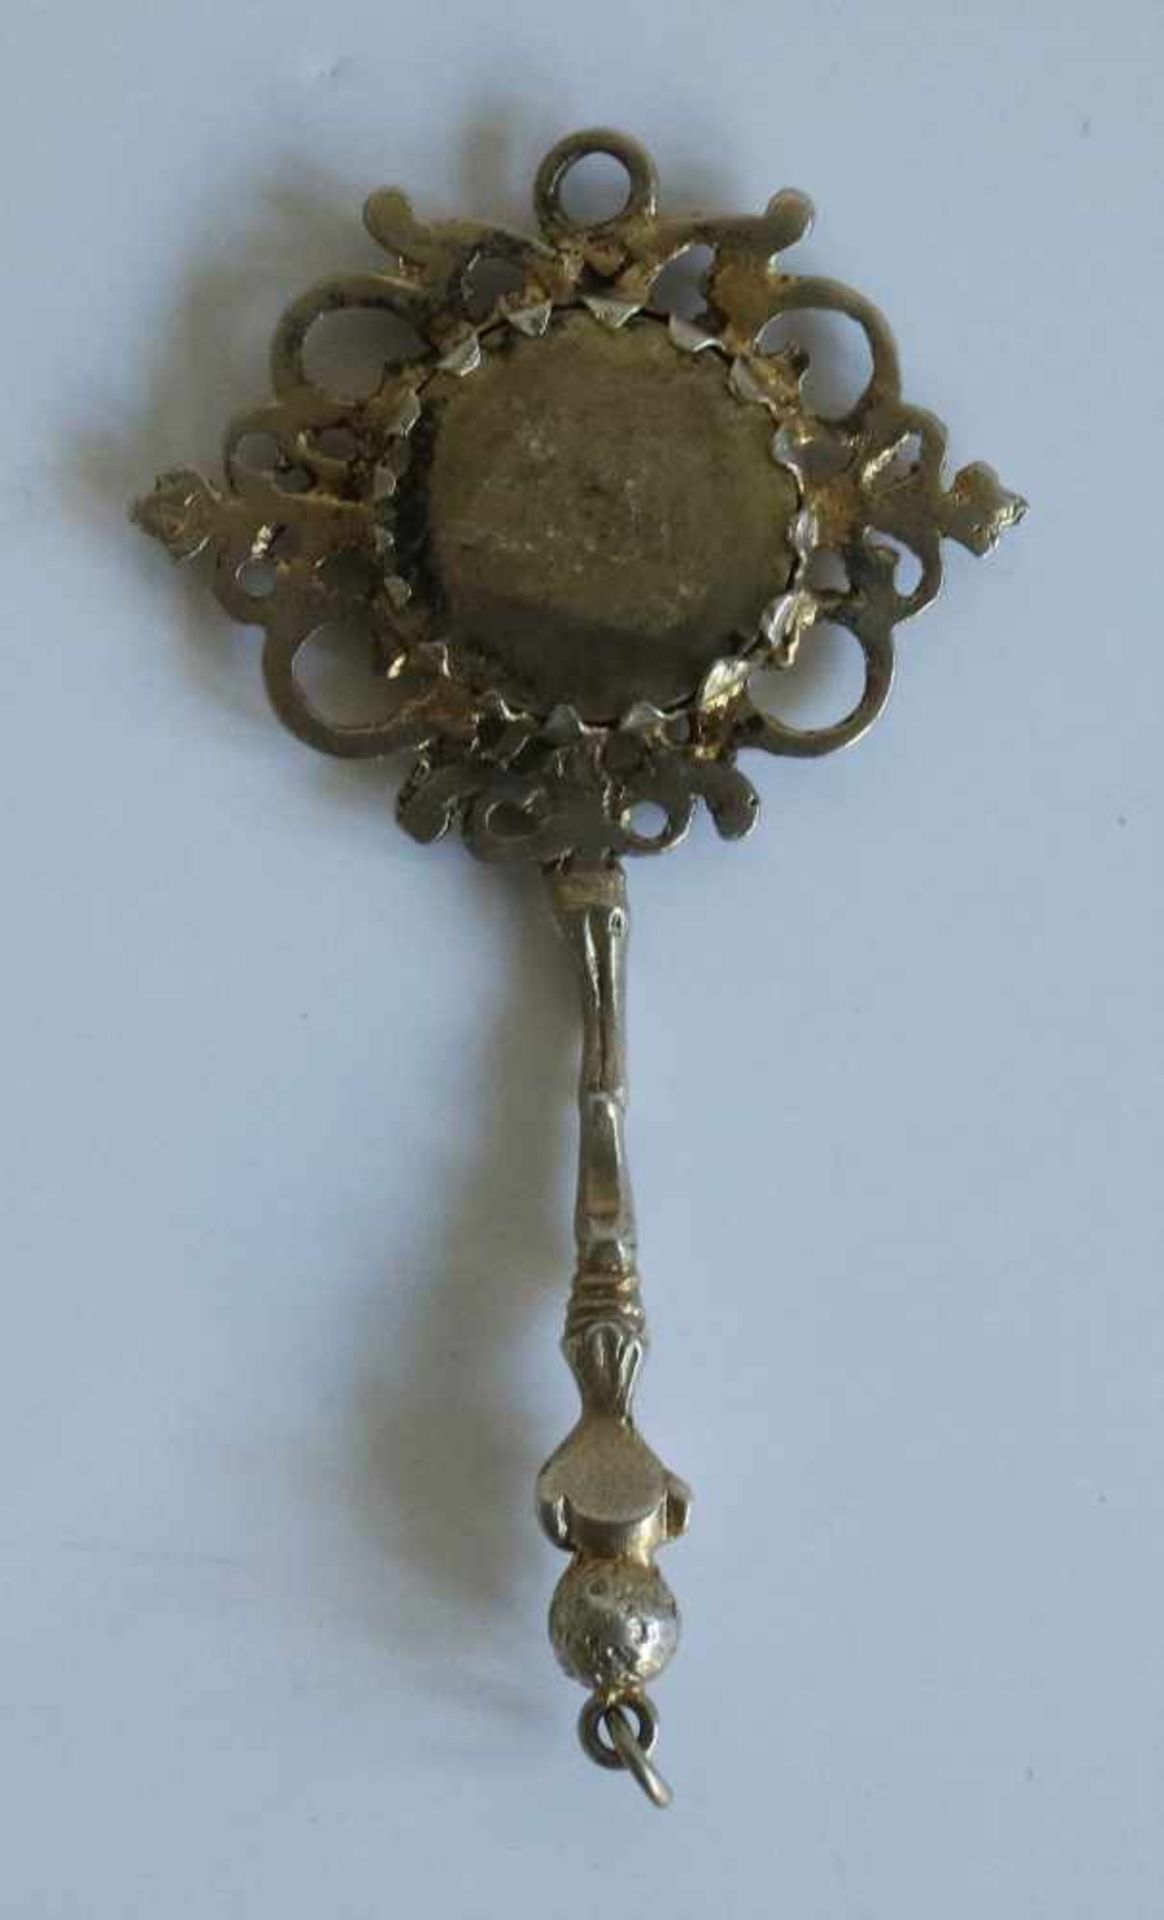 Silver mirror for chatelaine, 19th century 8,5 x 4,5 cm